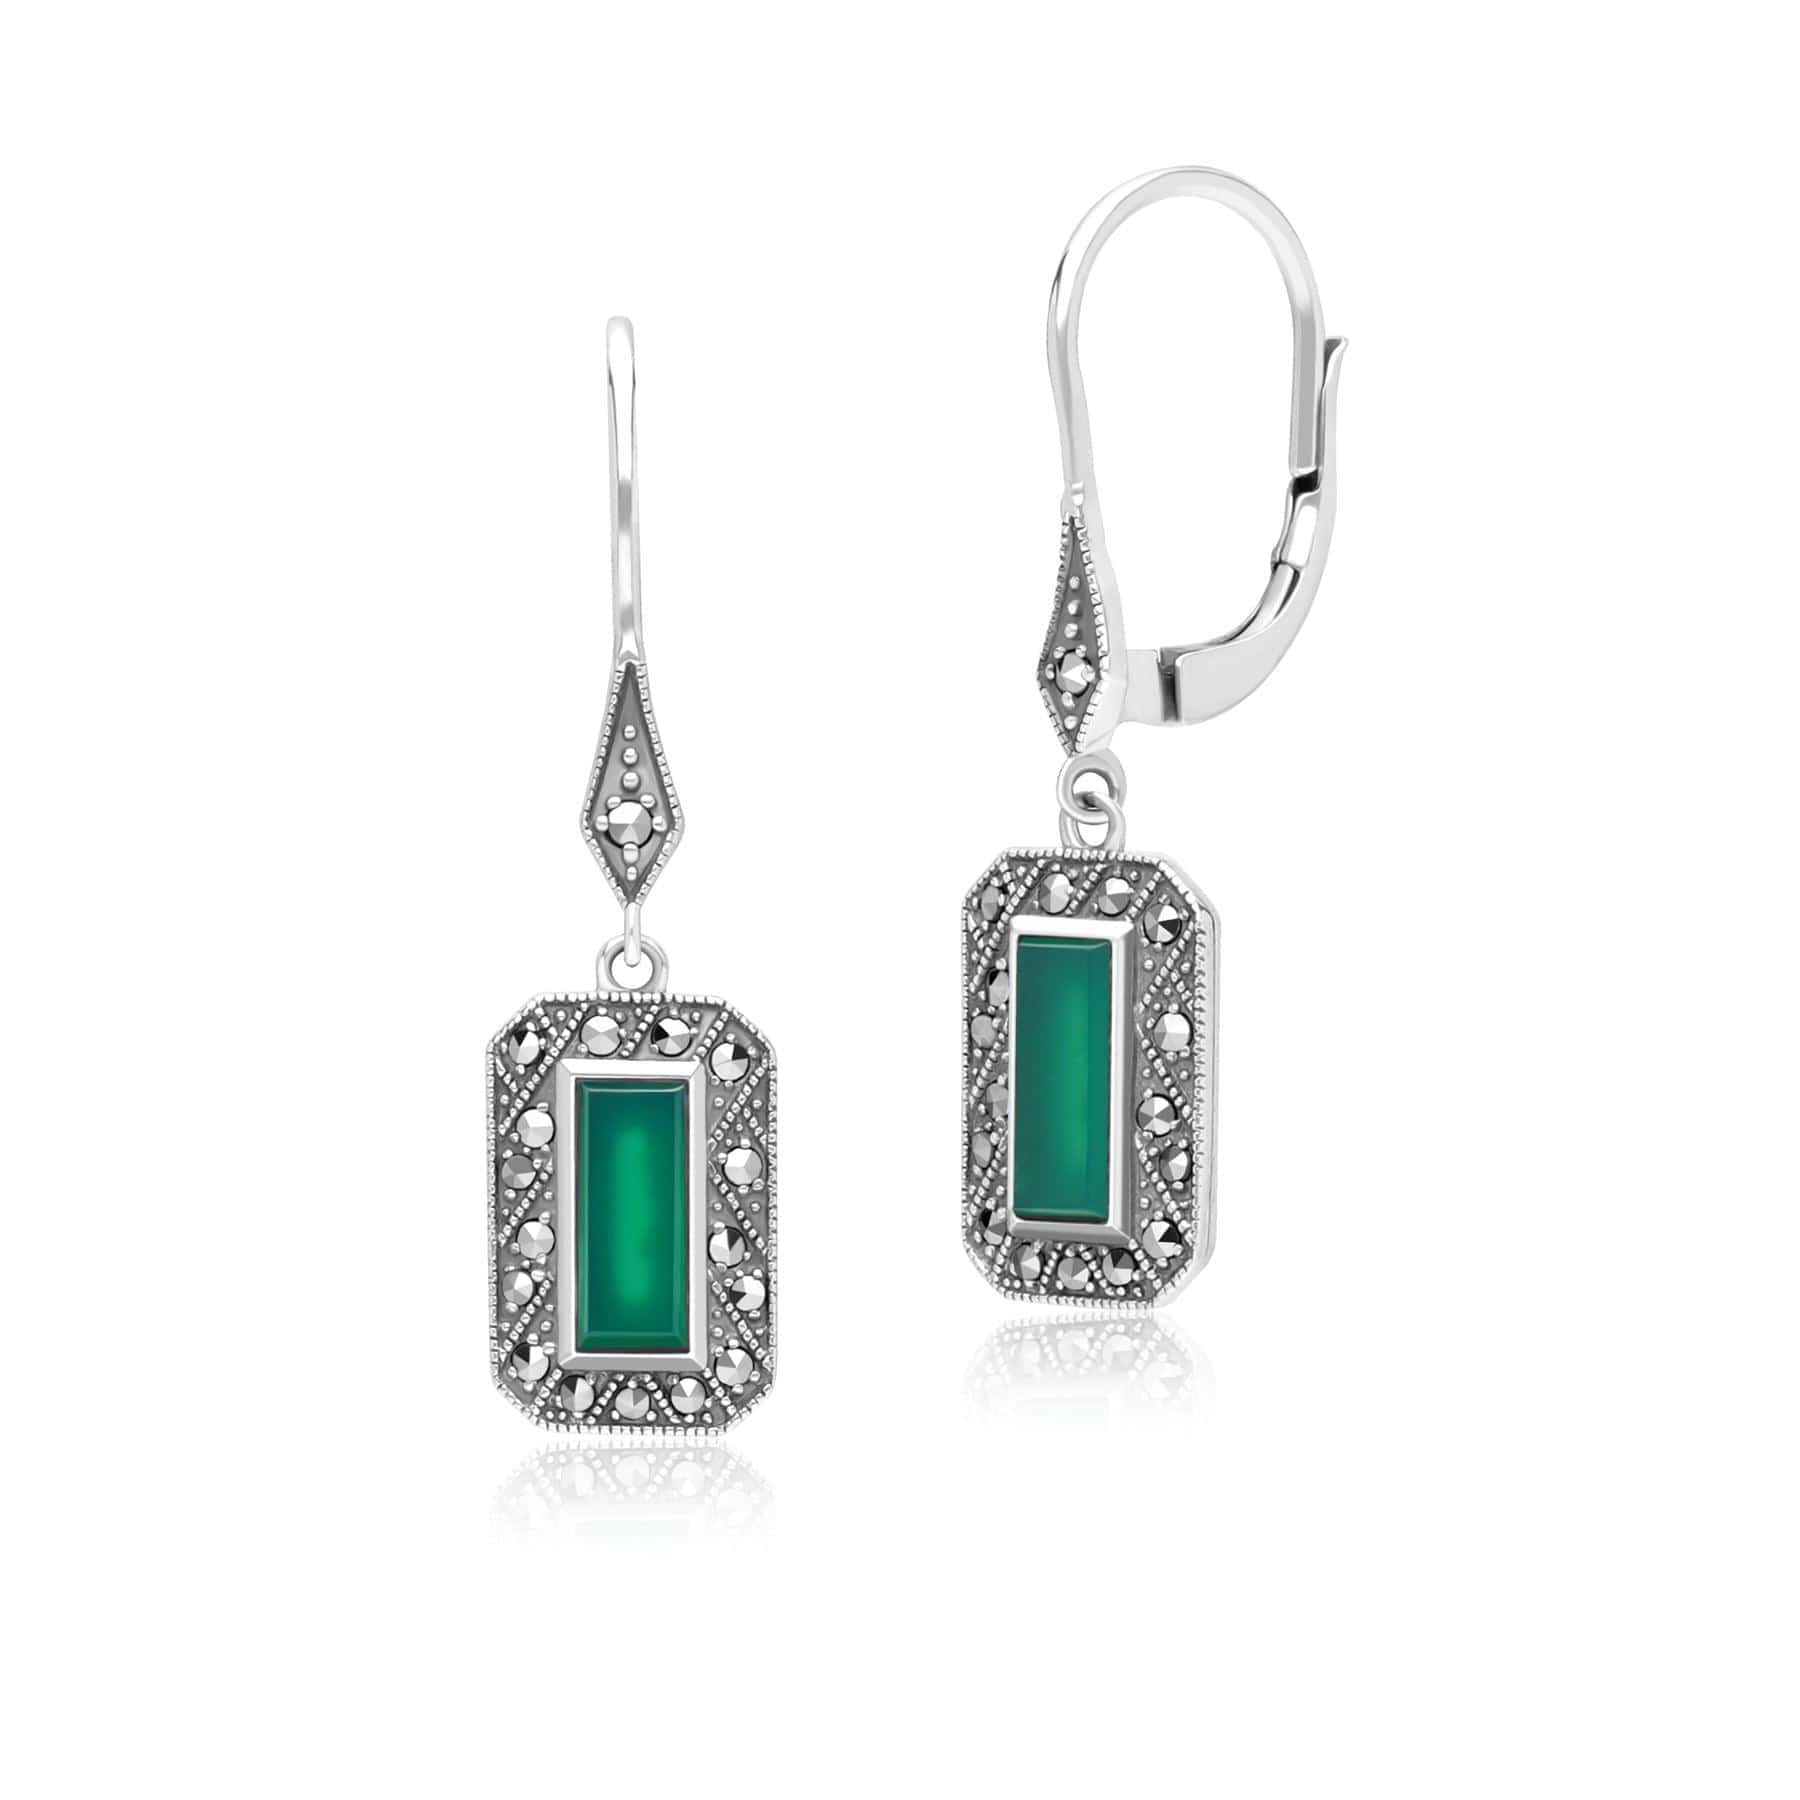 Art Deco Style Rectangle Chalcedony and Marcasite Drop Earrings in Sterling Silver 214E936101925 